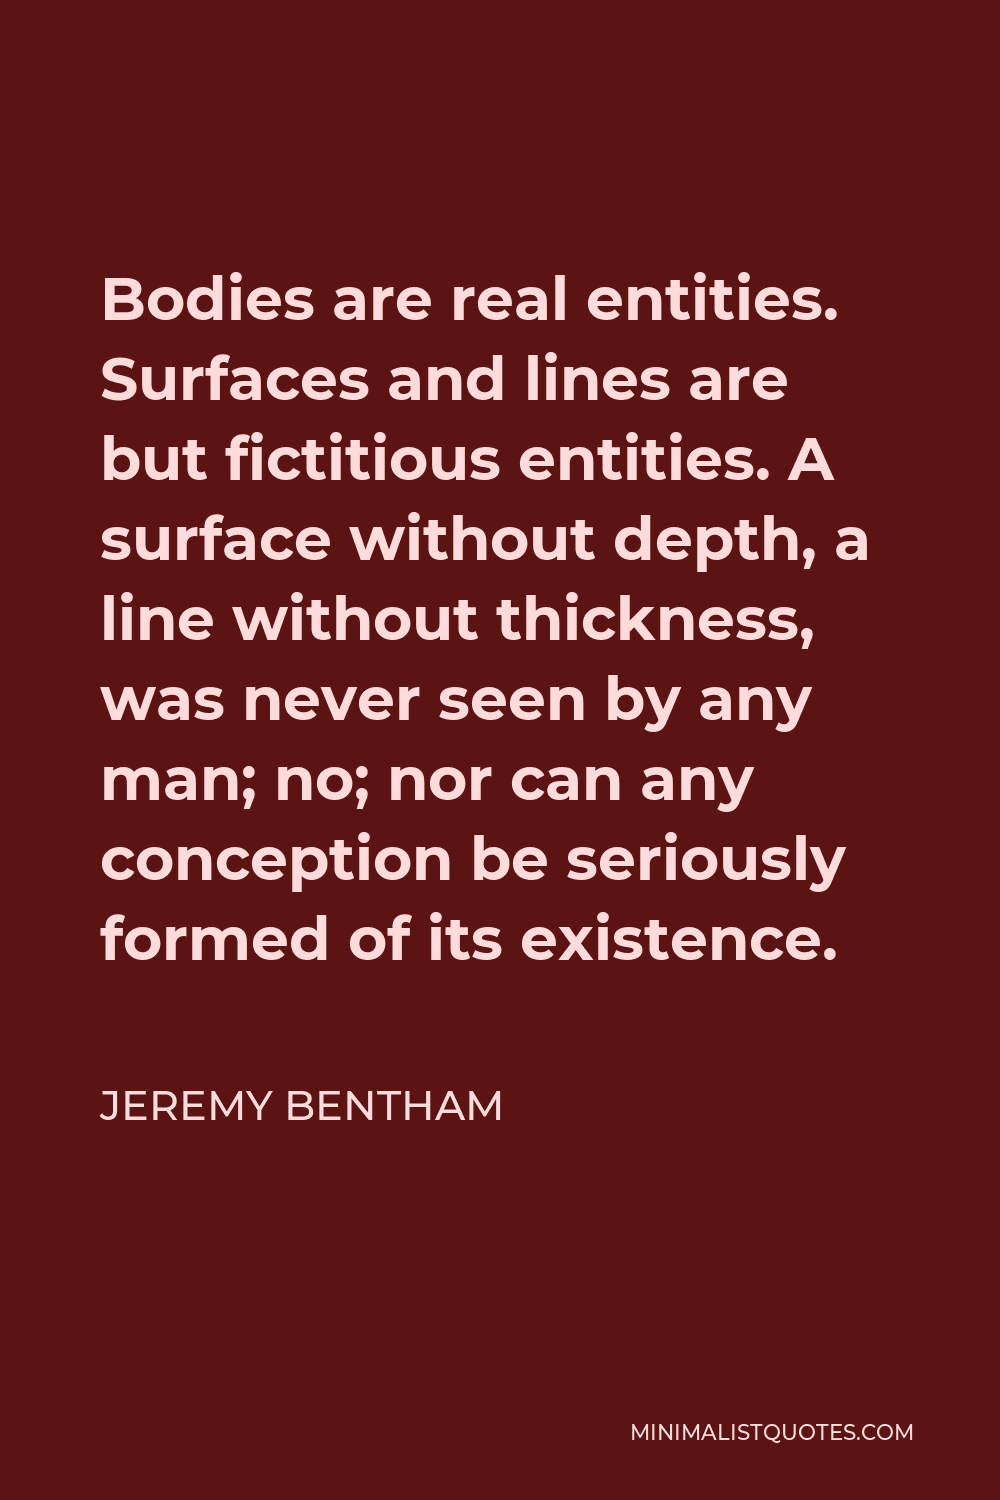 Jeremy Bentham Quote - Bodies are real entities. Surfaces and lines are but fictitious entities. A surface without depth, a line without thickness, was never seen by any man; no; nor can any conception be seriously formed of its existence.